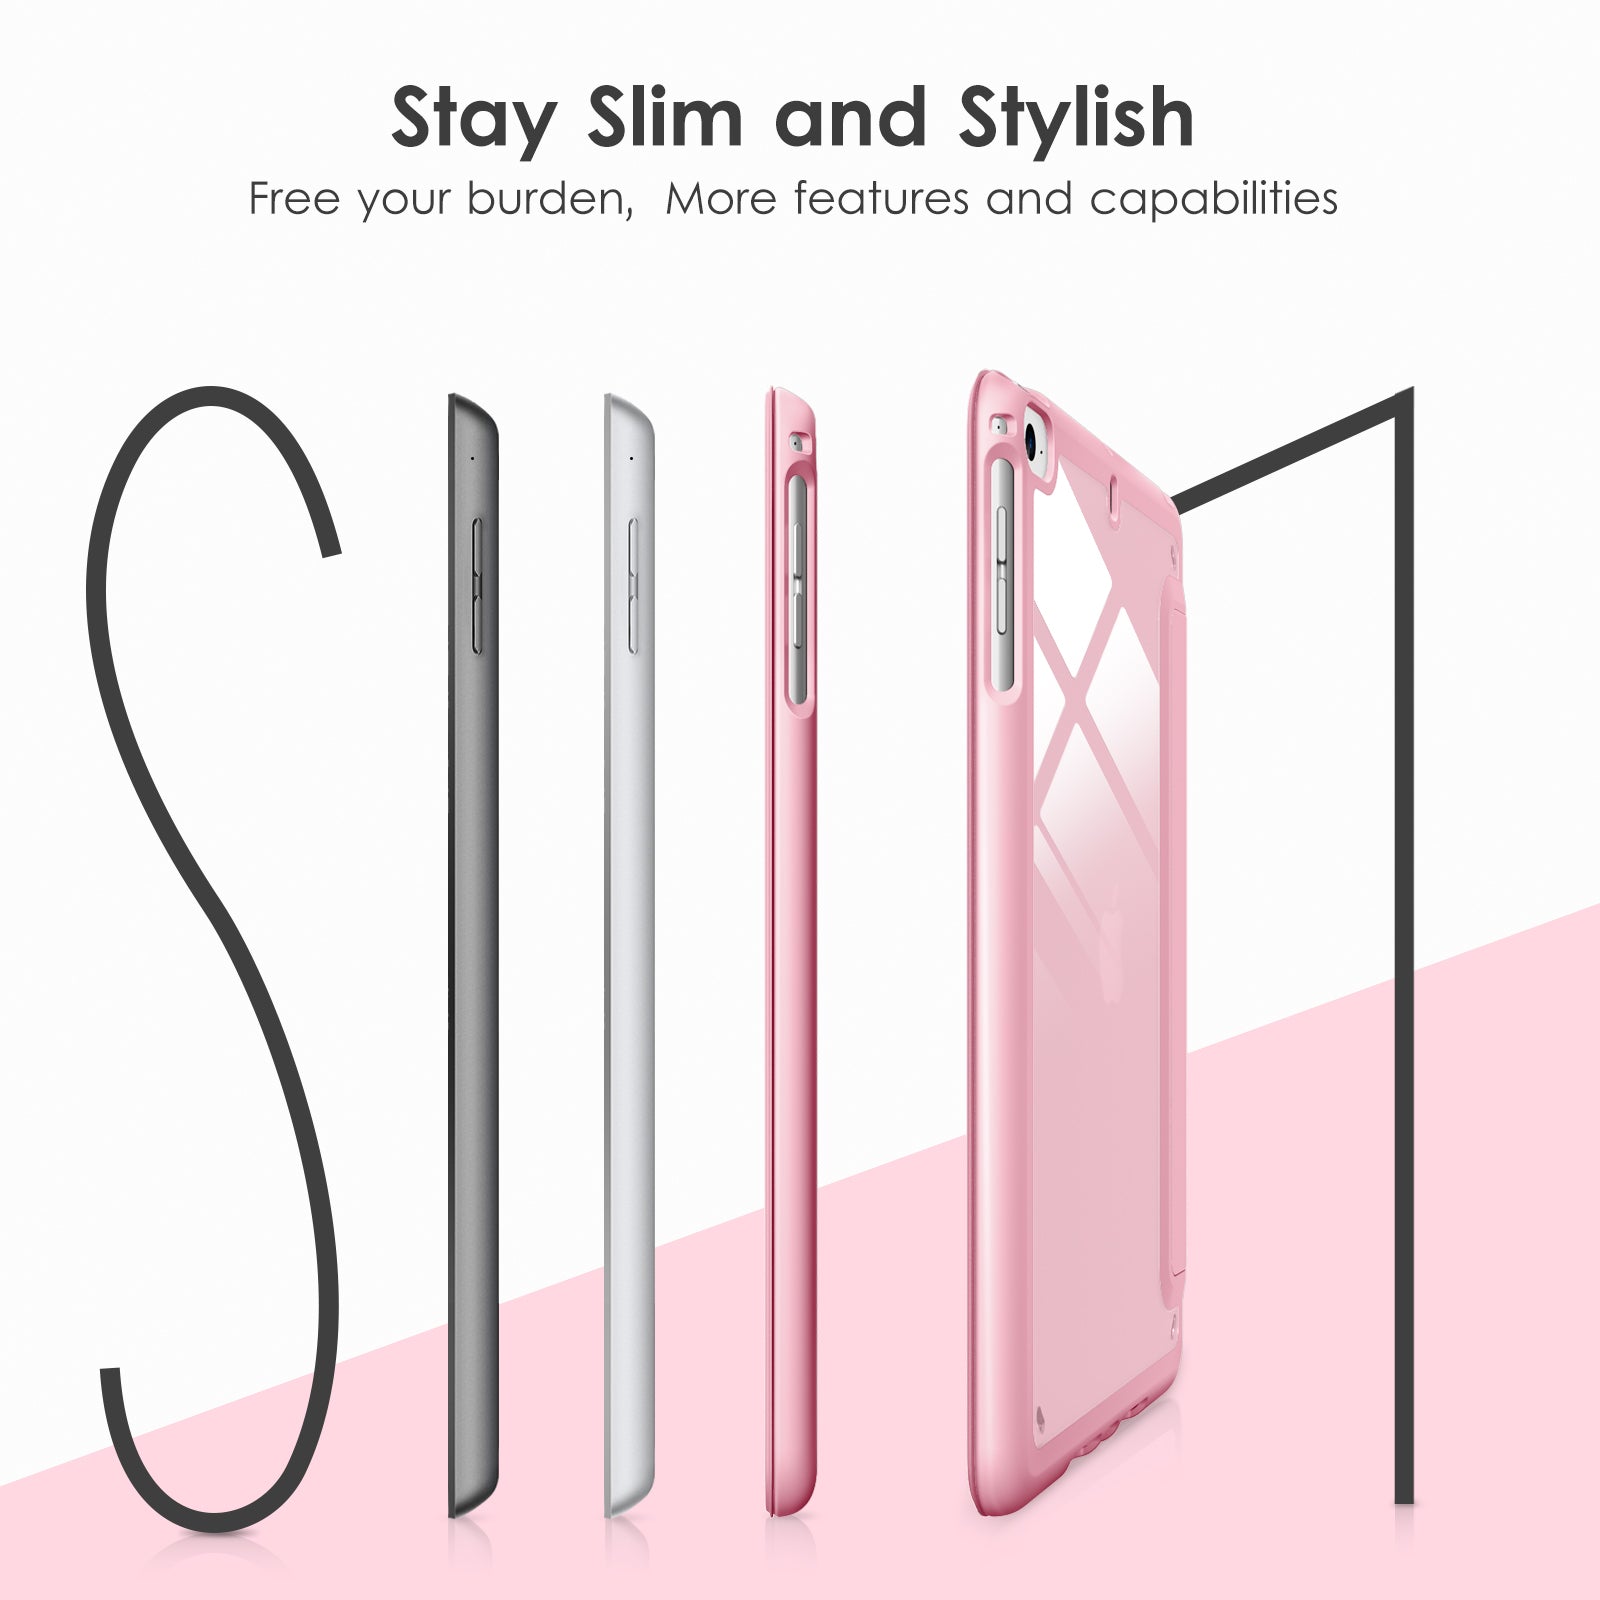 DTTOCASE Slim Clear Case for iPad Mini 4 5 3 2 1 (7.9 inch),TPU Shockproof Frame Cover[Support Auto Sleep/Wake] for iPad Mini 1st 2nd 3rd 4th 5th Generation - Rose Gold